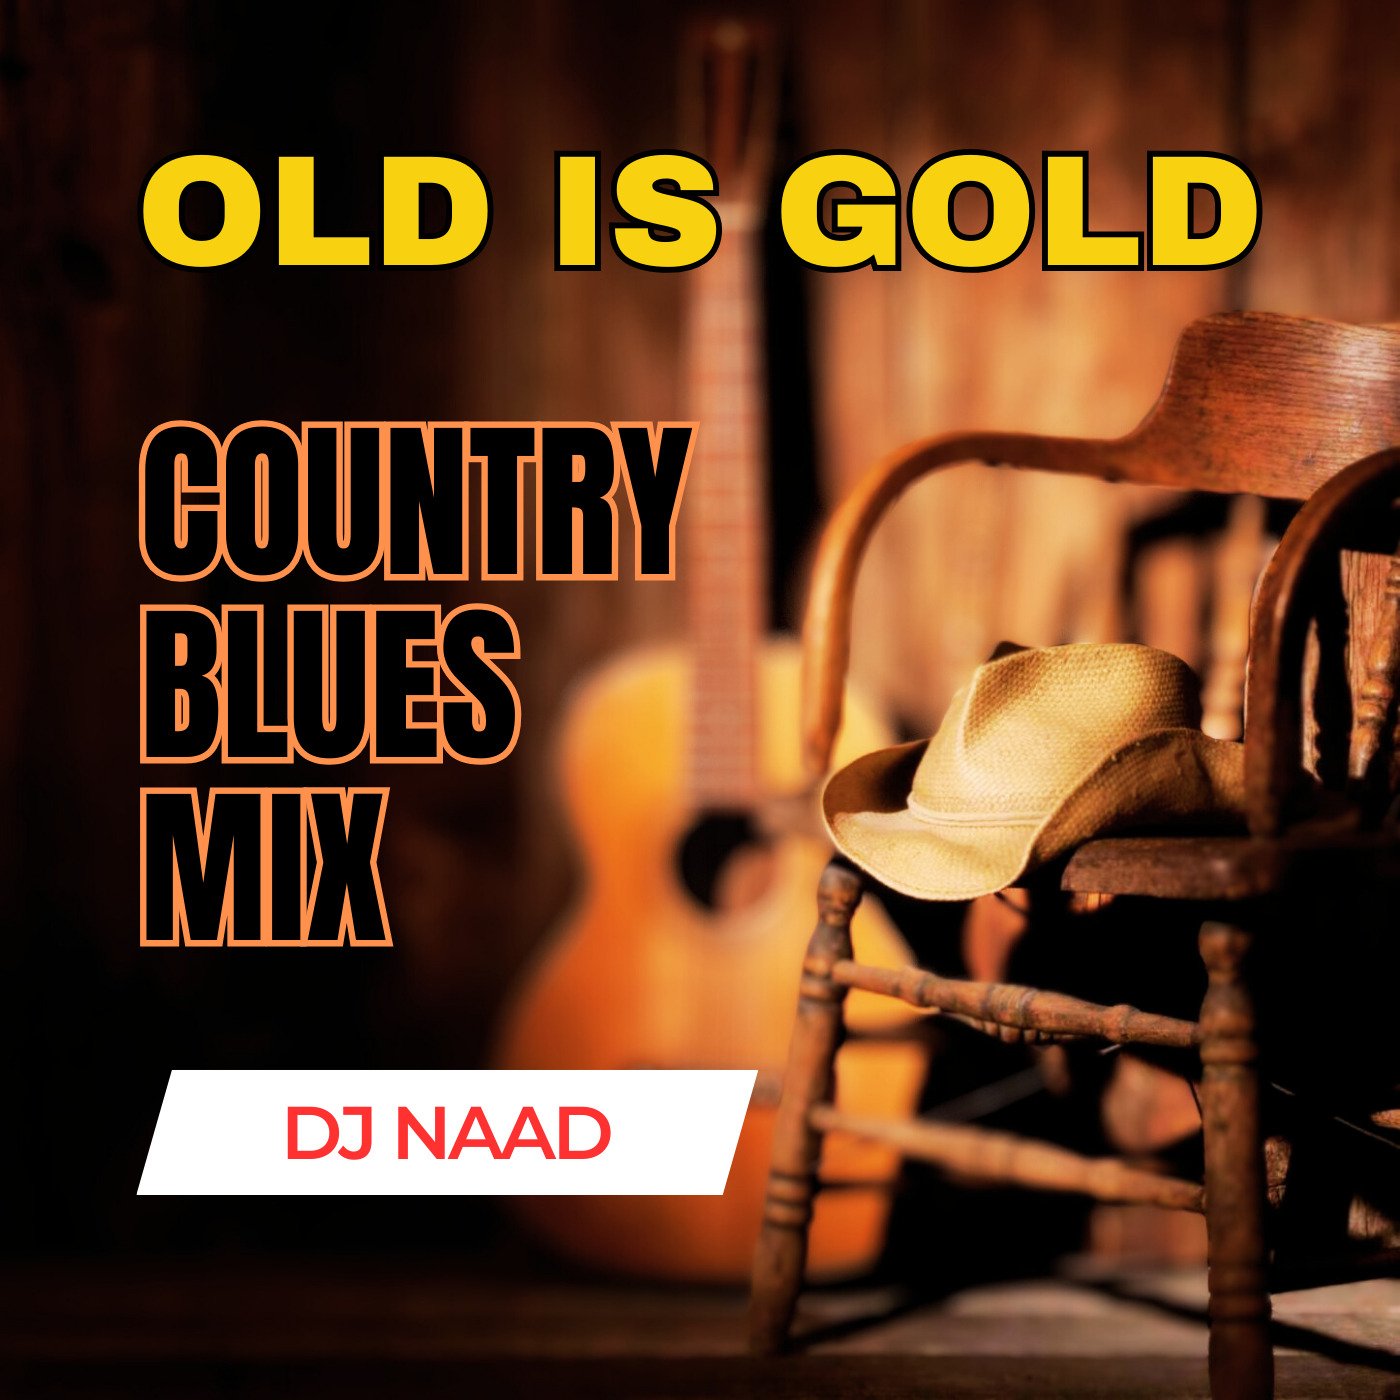 Country Blues Mix Ft Don Williams, Kenny Rogers, Dolly Parton, Alan Jackson, Luther Vandross - DJ Naad